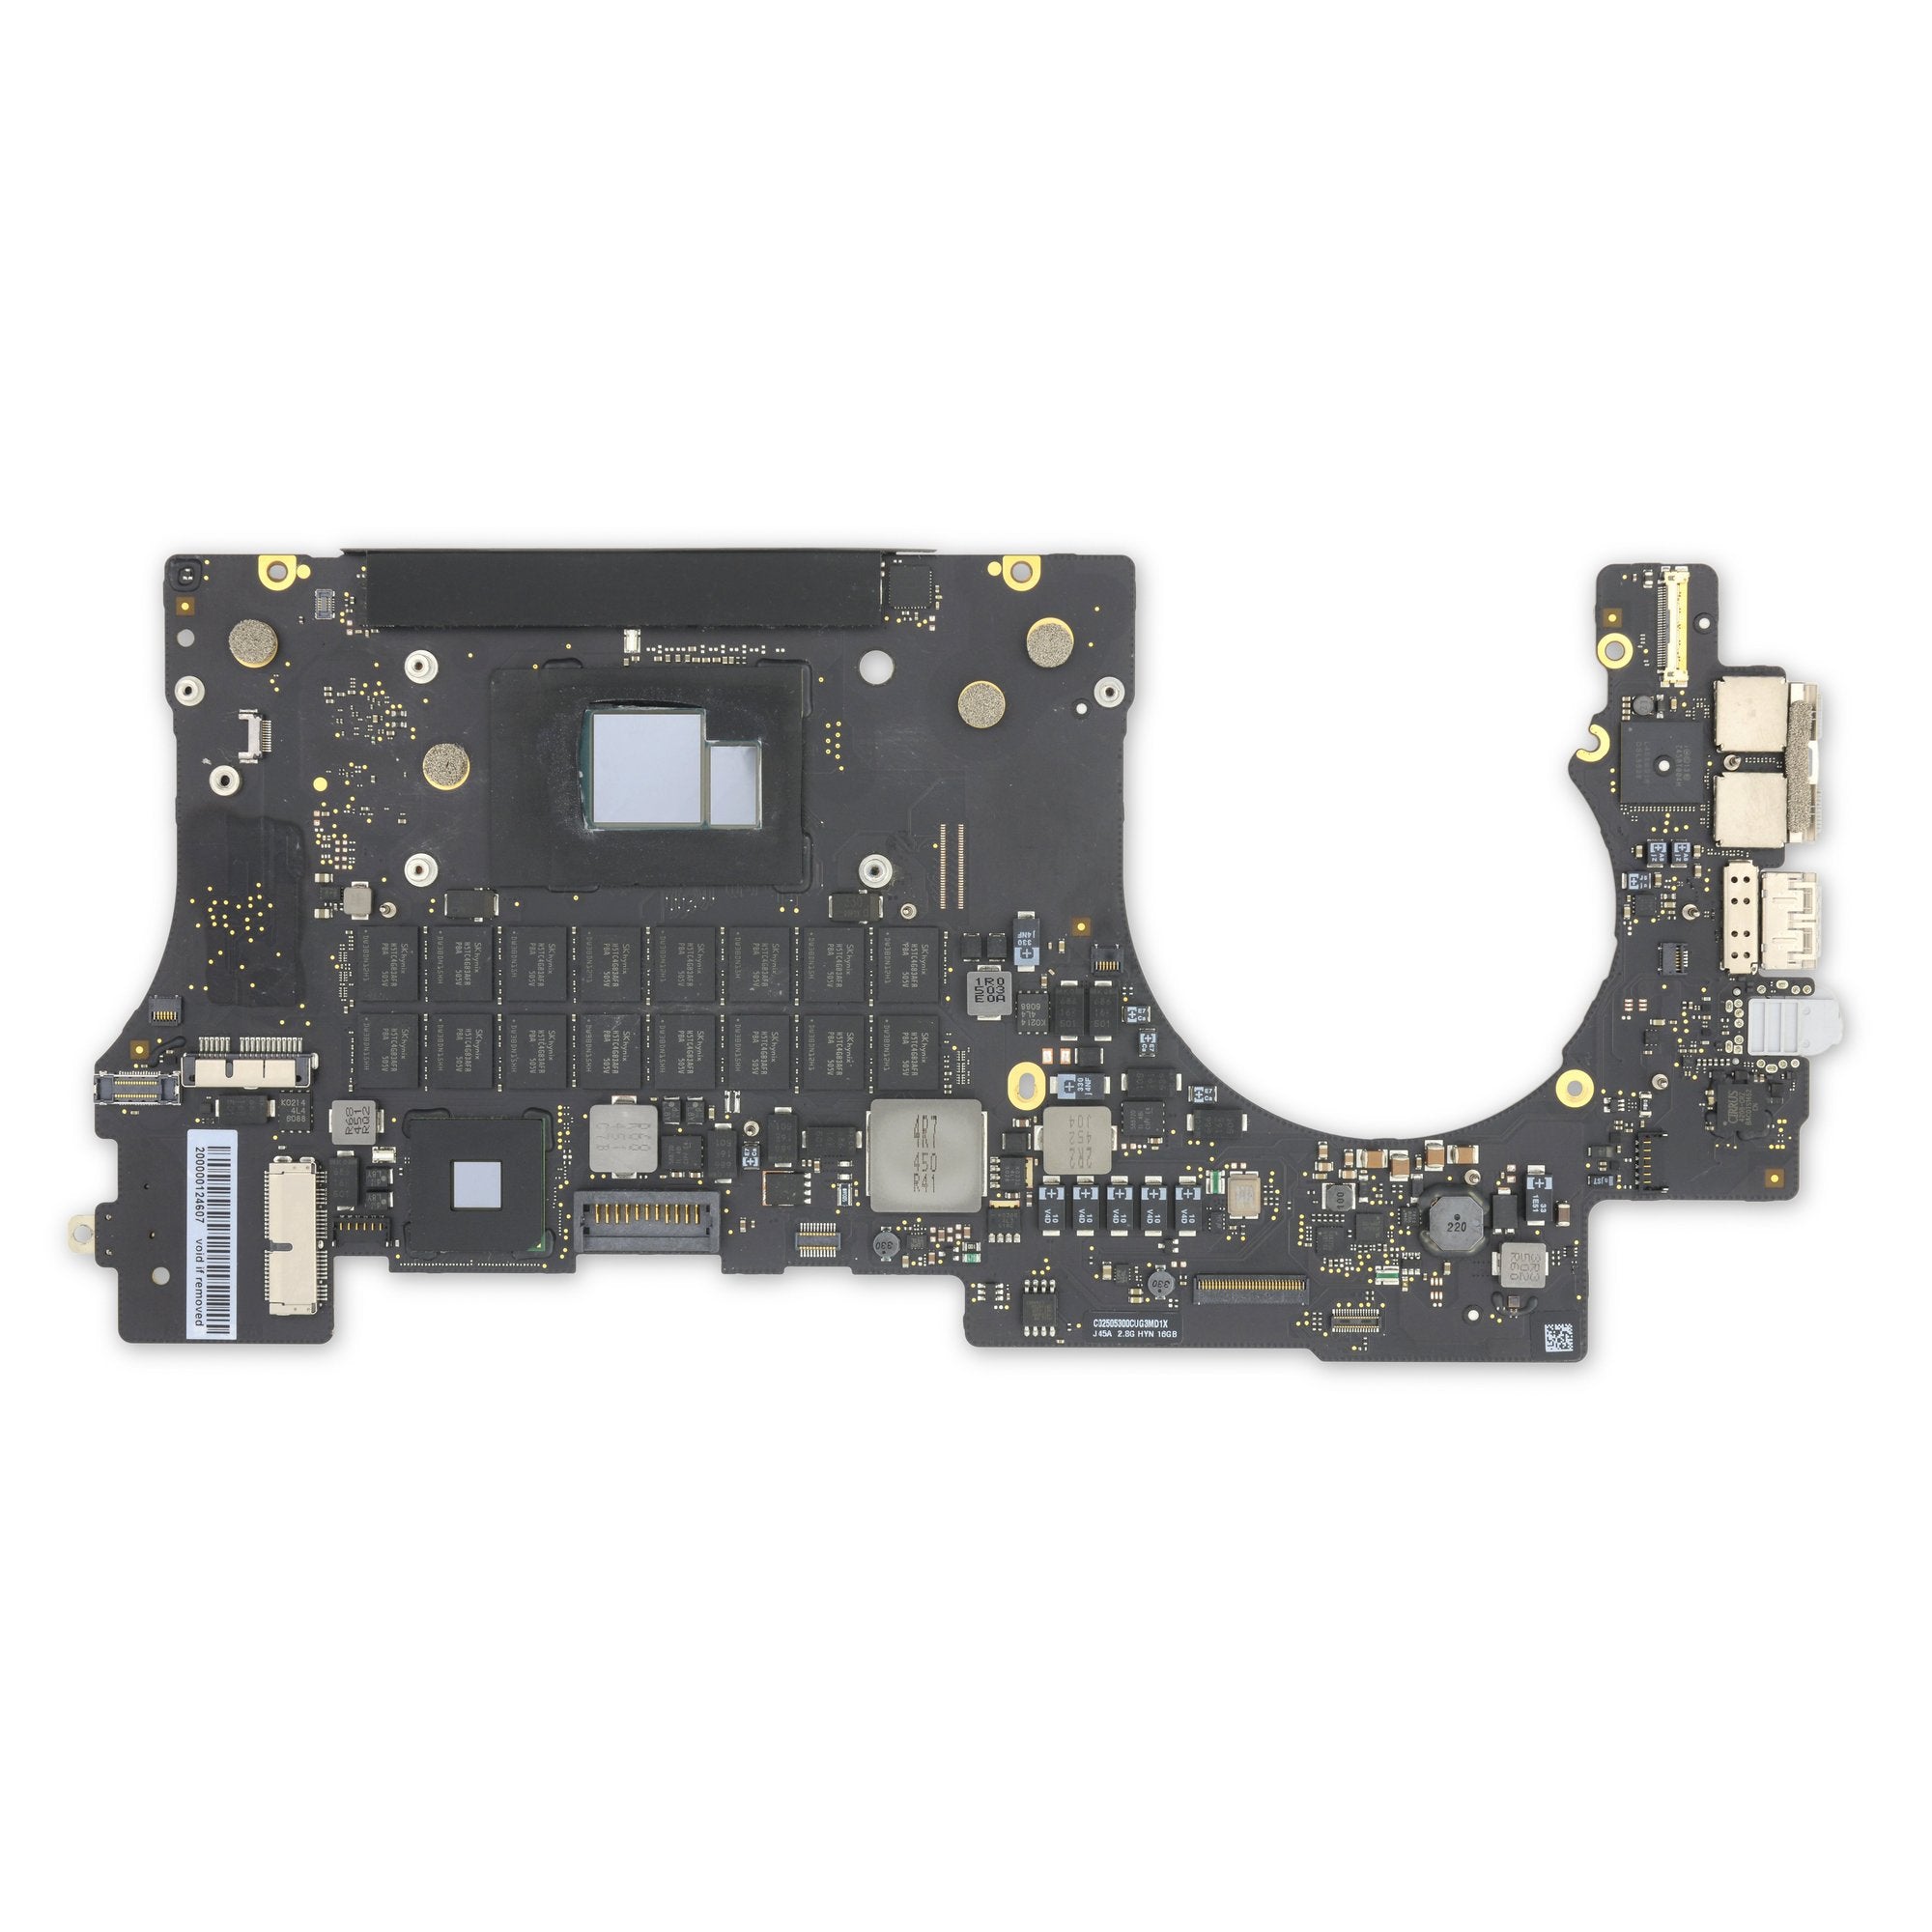 MacBook Pro 15" Retina (Mid 2014, Integrated Graphics) 2.8 GHz Logic Board Used